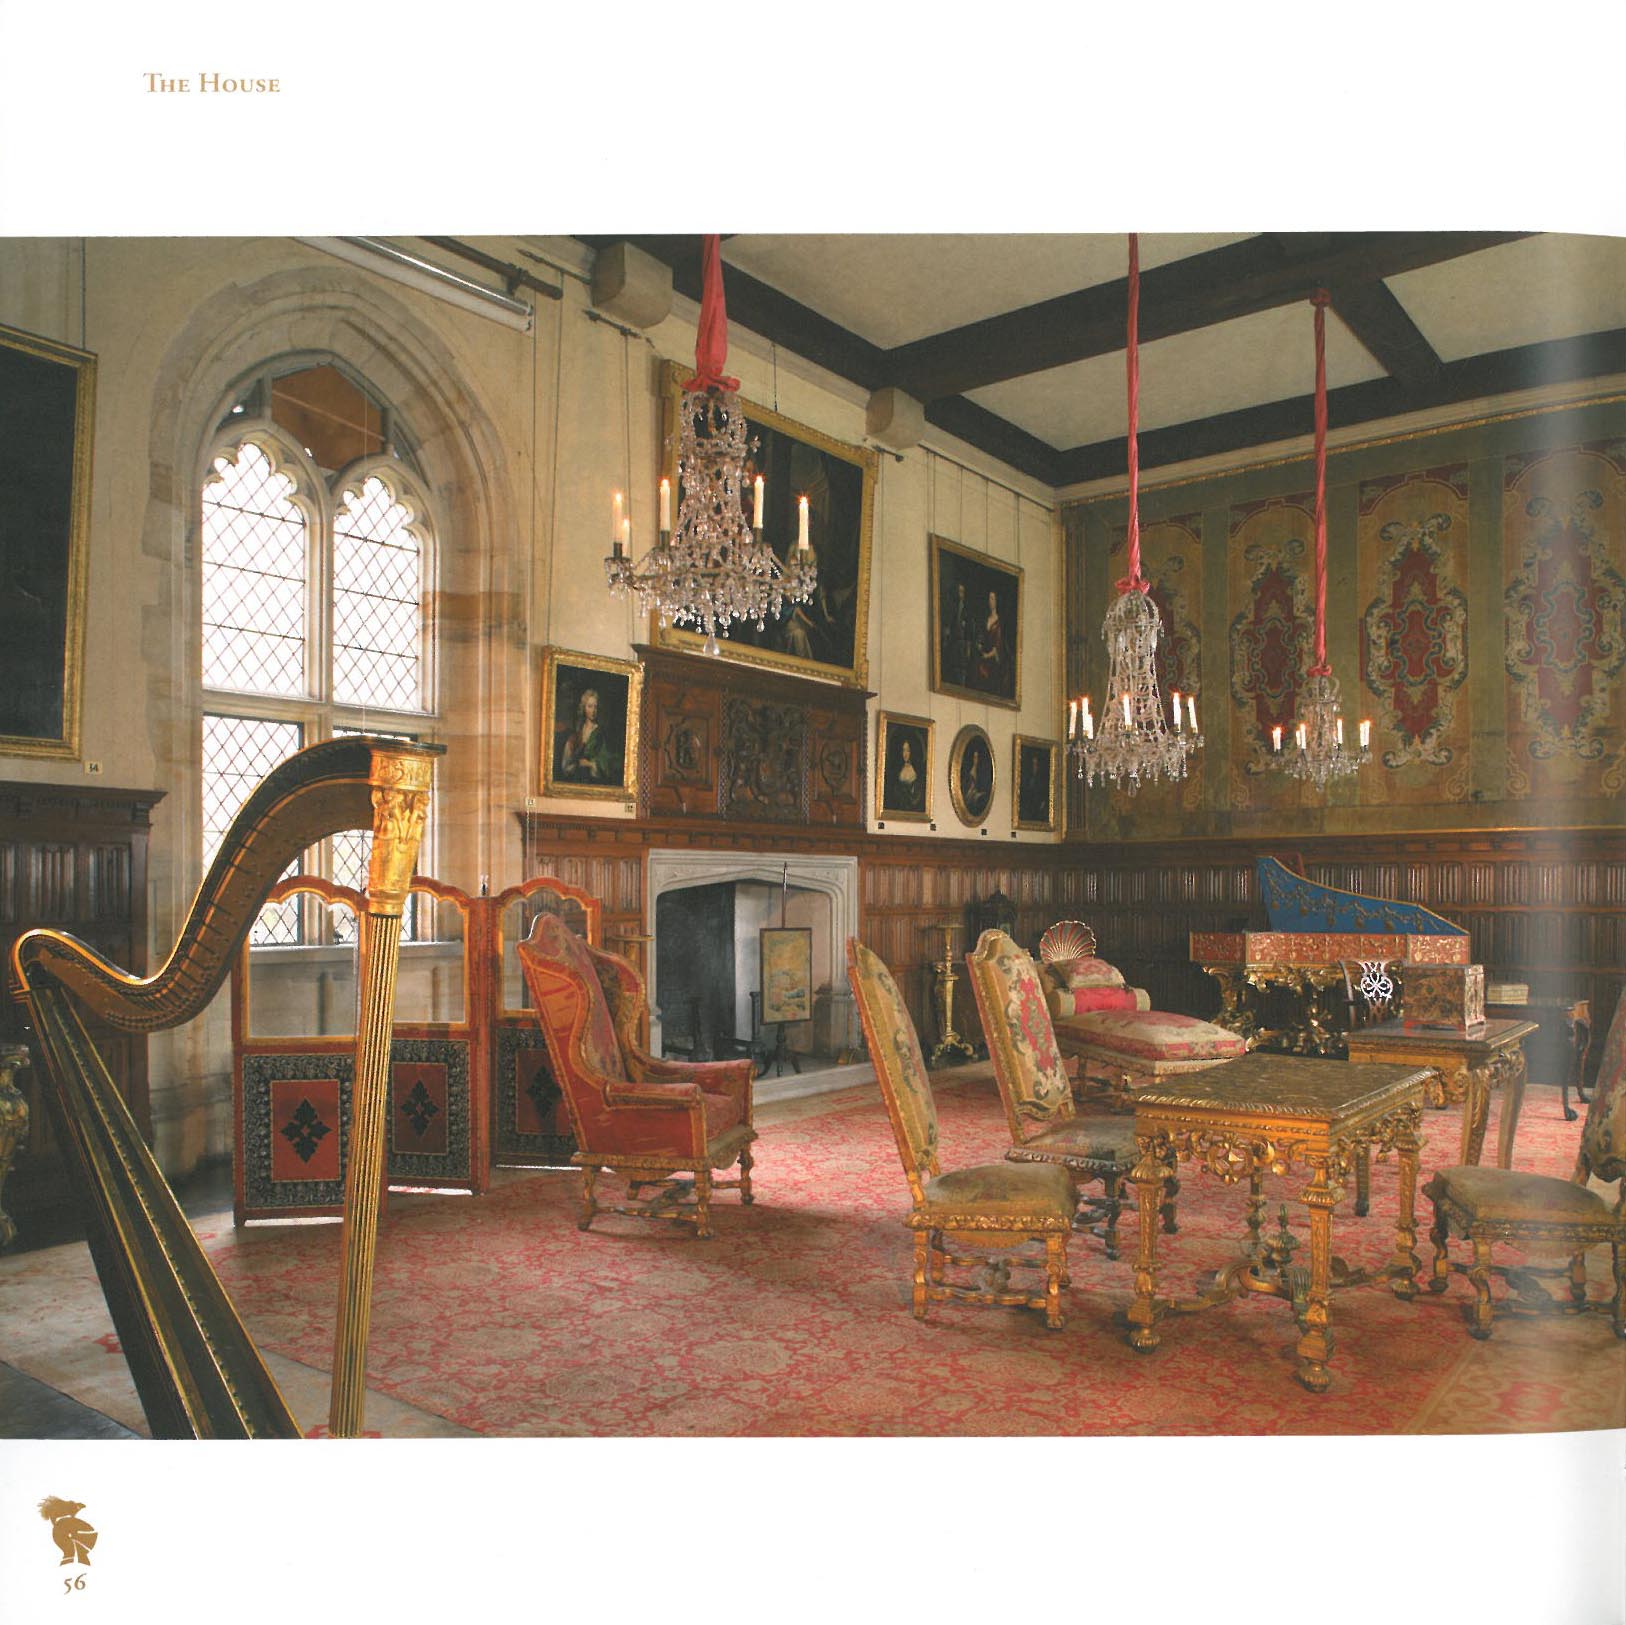 The Queen Elizabeth Room. Image courtesy of Penshurst Place.